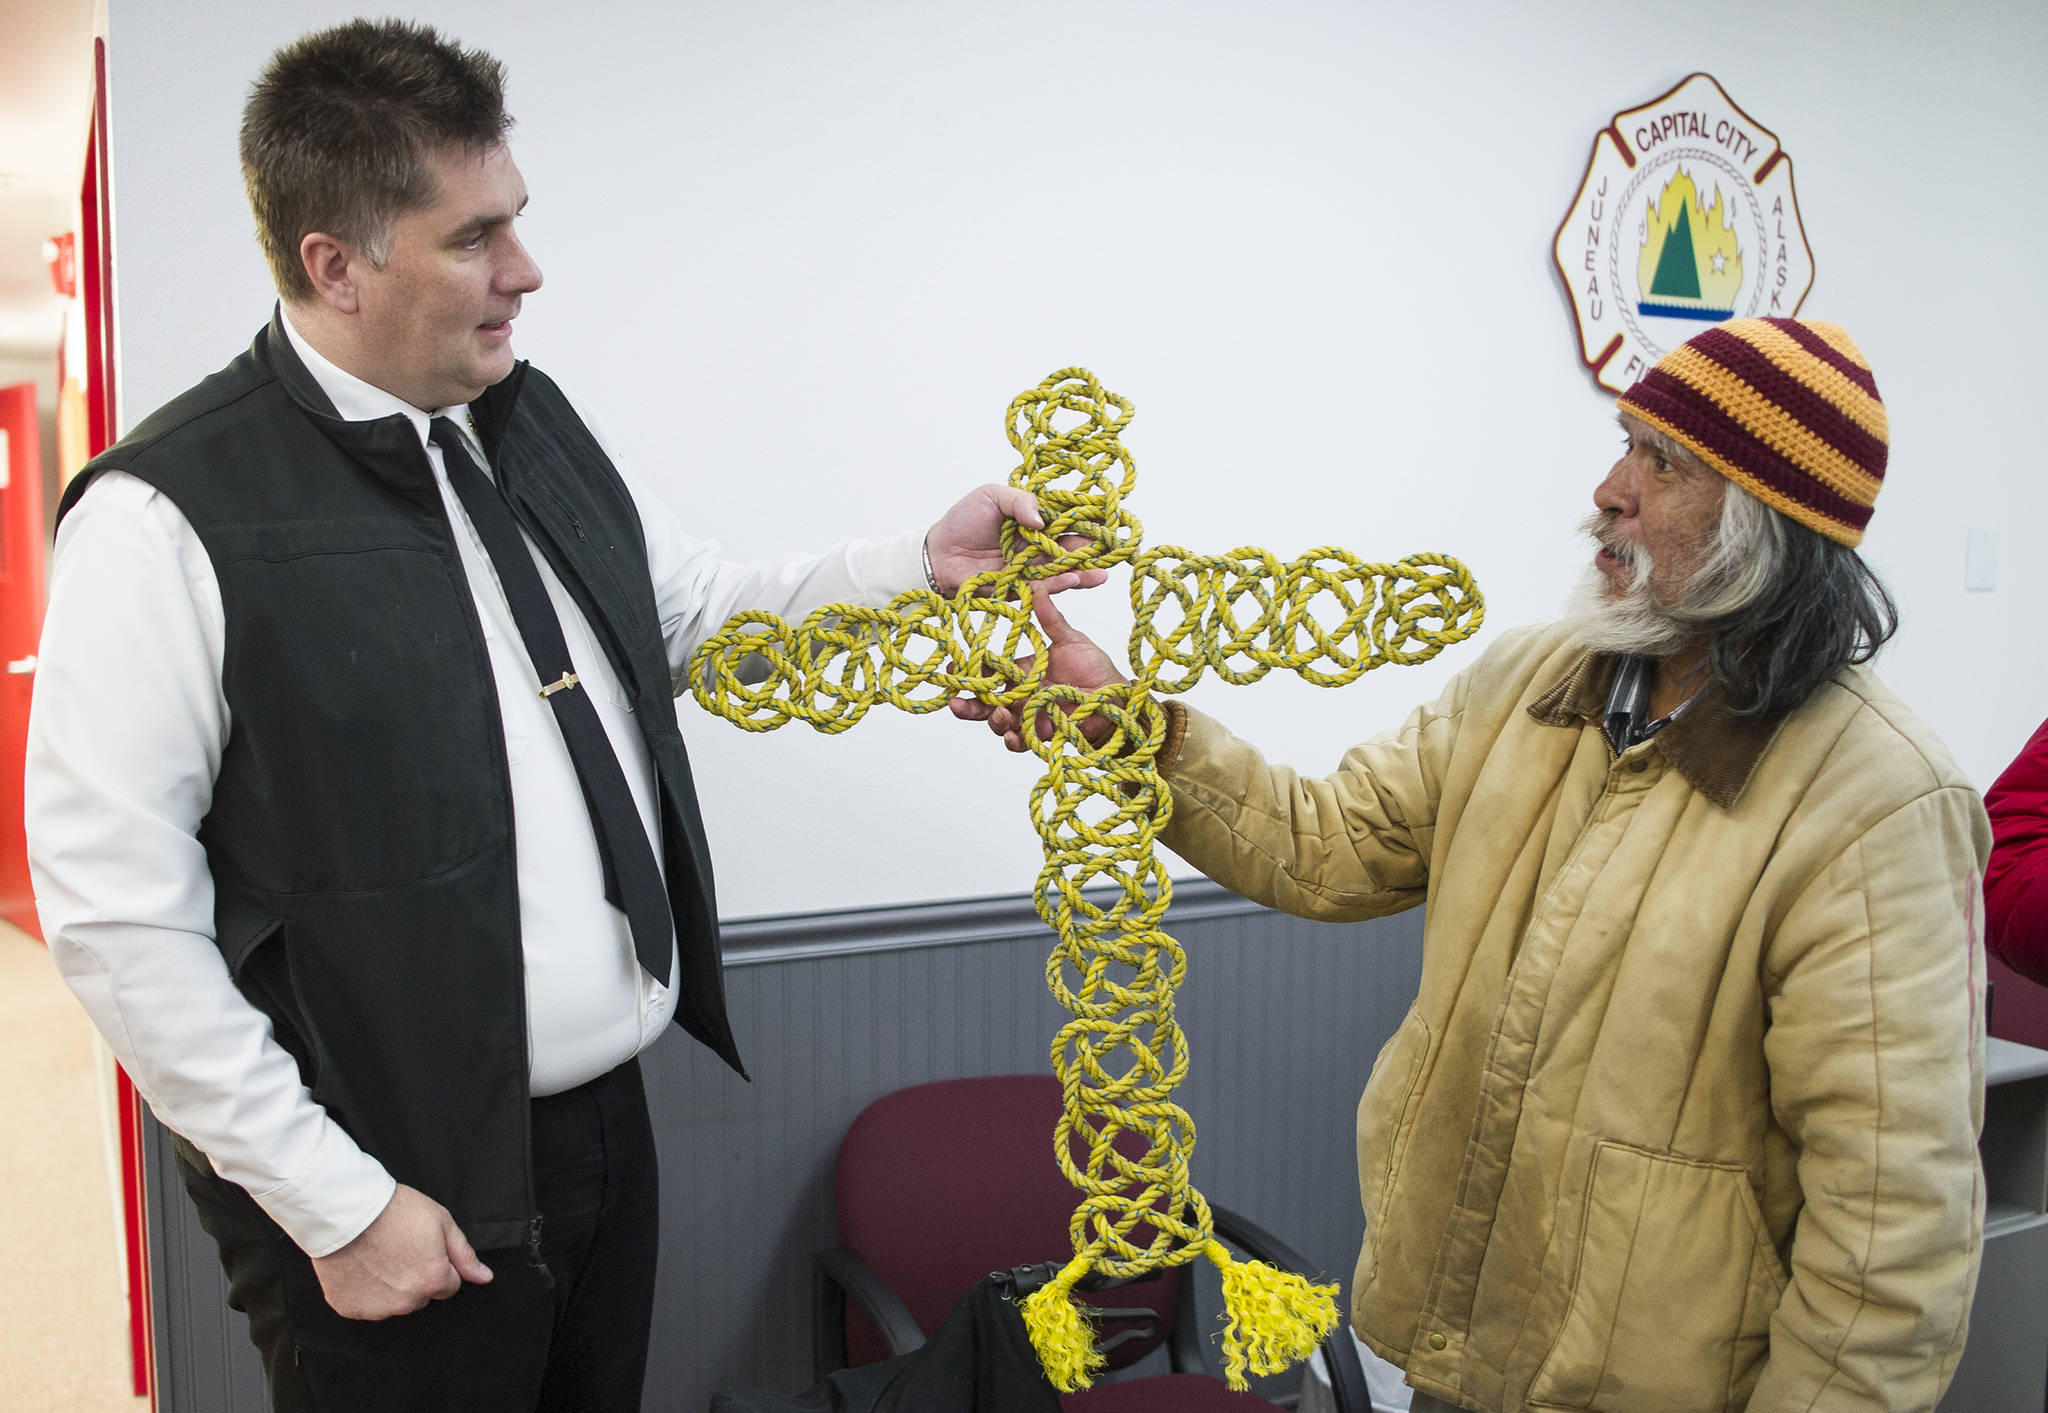 Thomas Bell, right, gives a woven-rope cross to Capital City Fire/Rescue Fire Chief Richard Etheridge in goodwill at the Downtown Fire Station on Monday, Sept. 11, 2017. Bell weaves the ropes previously used on crab pots to raise money but was looking to show his appreciation to the department for its work with the homeless. Bell is homeless and currently stays at the Glory Hole. (Michael Penn | Juneau Empire)